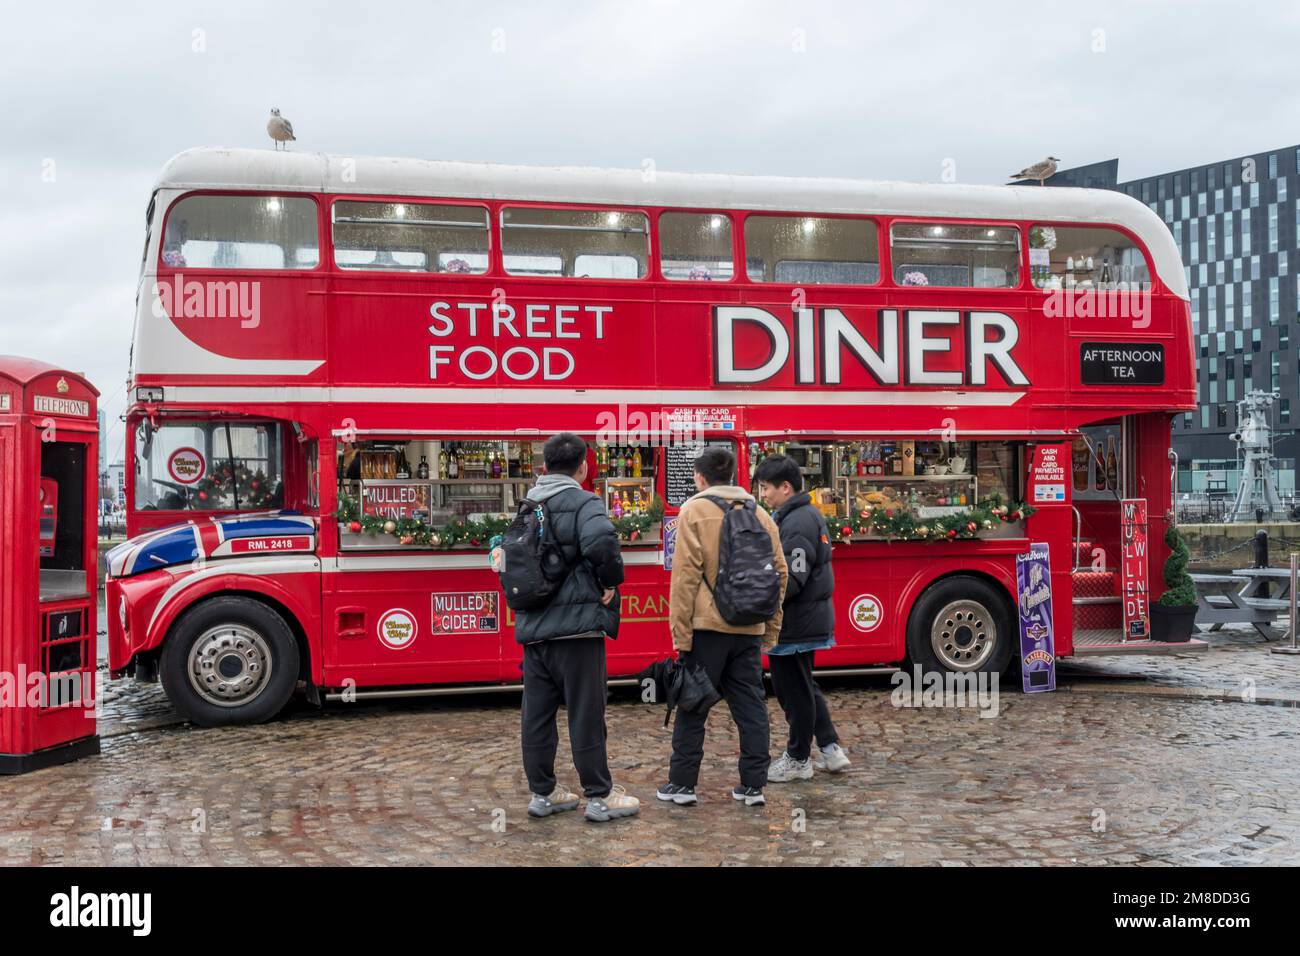 Red double-decker bus repurposed as a street food Diner at Liverpool's Albert Dock. Stock Photo